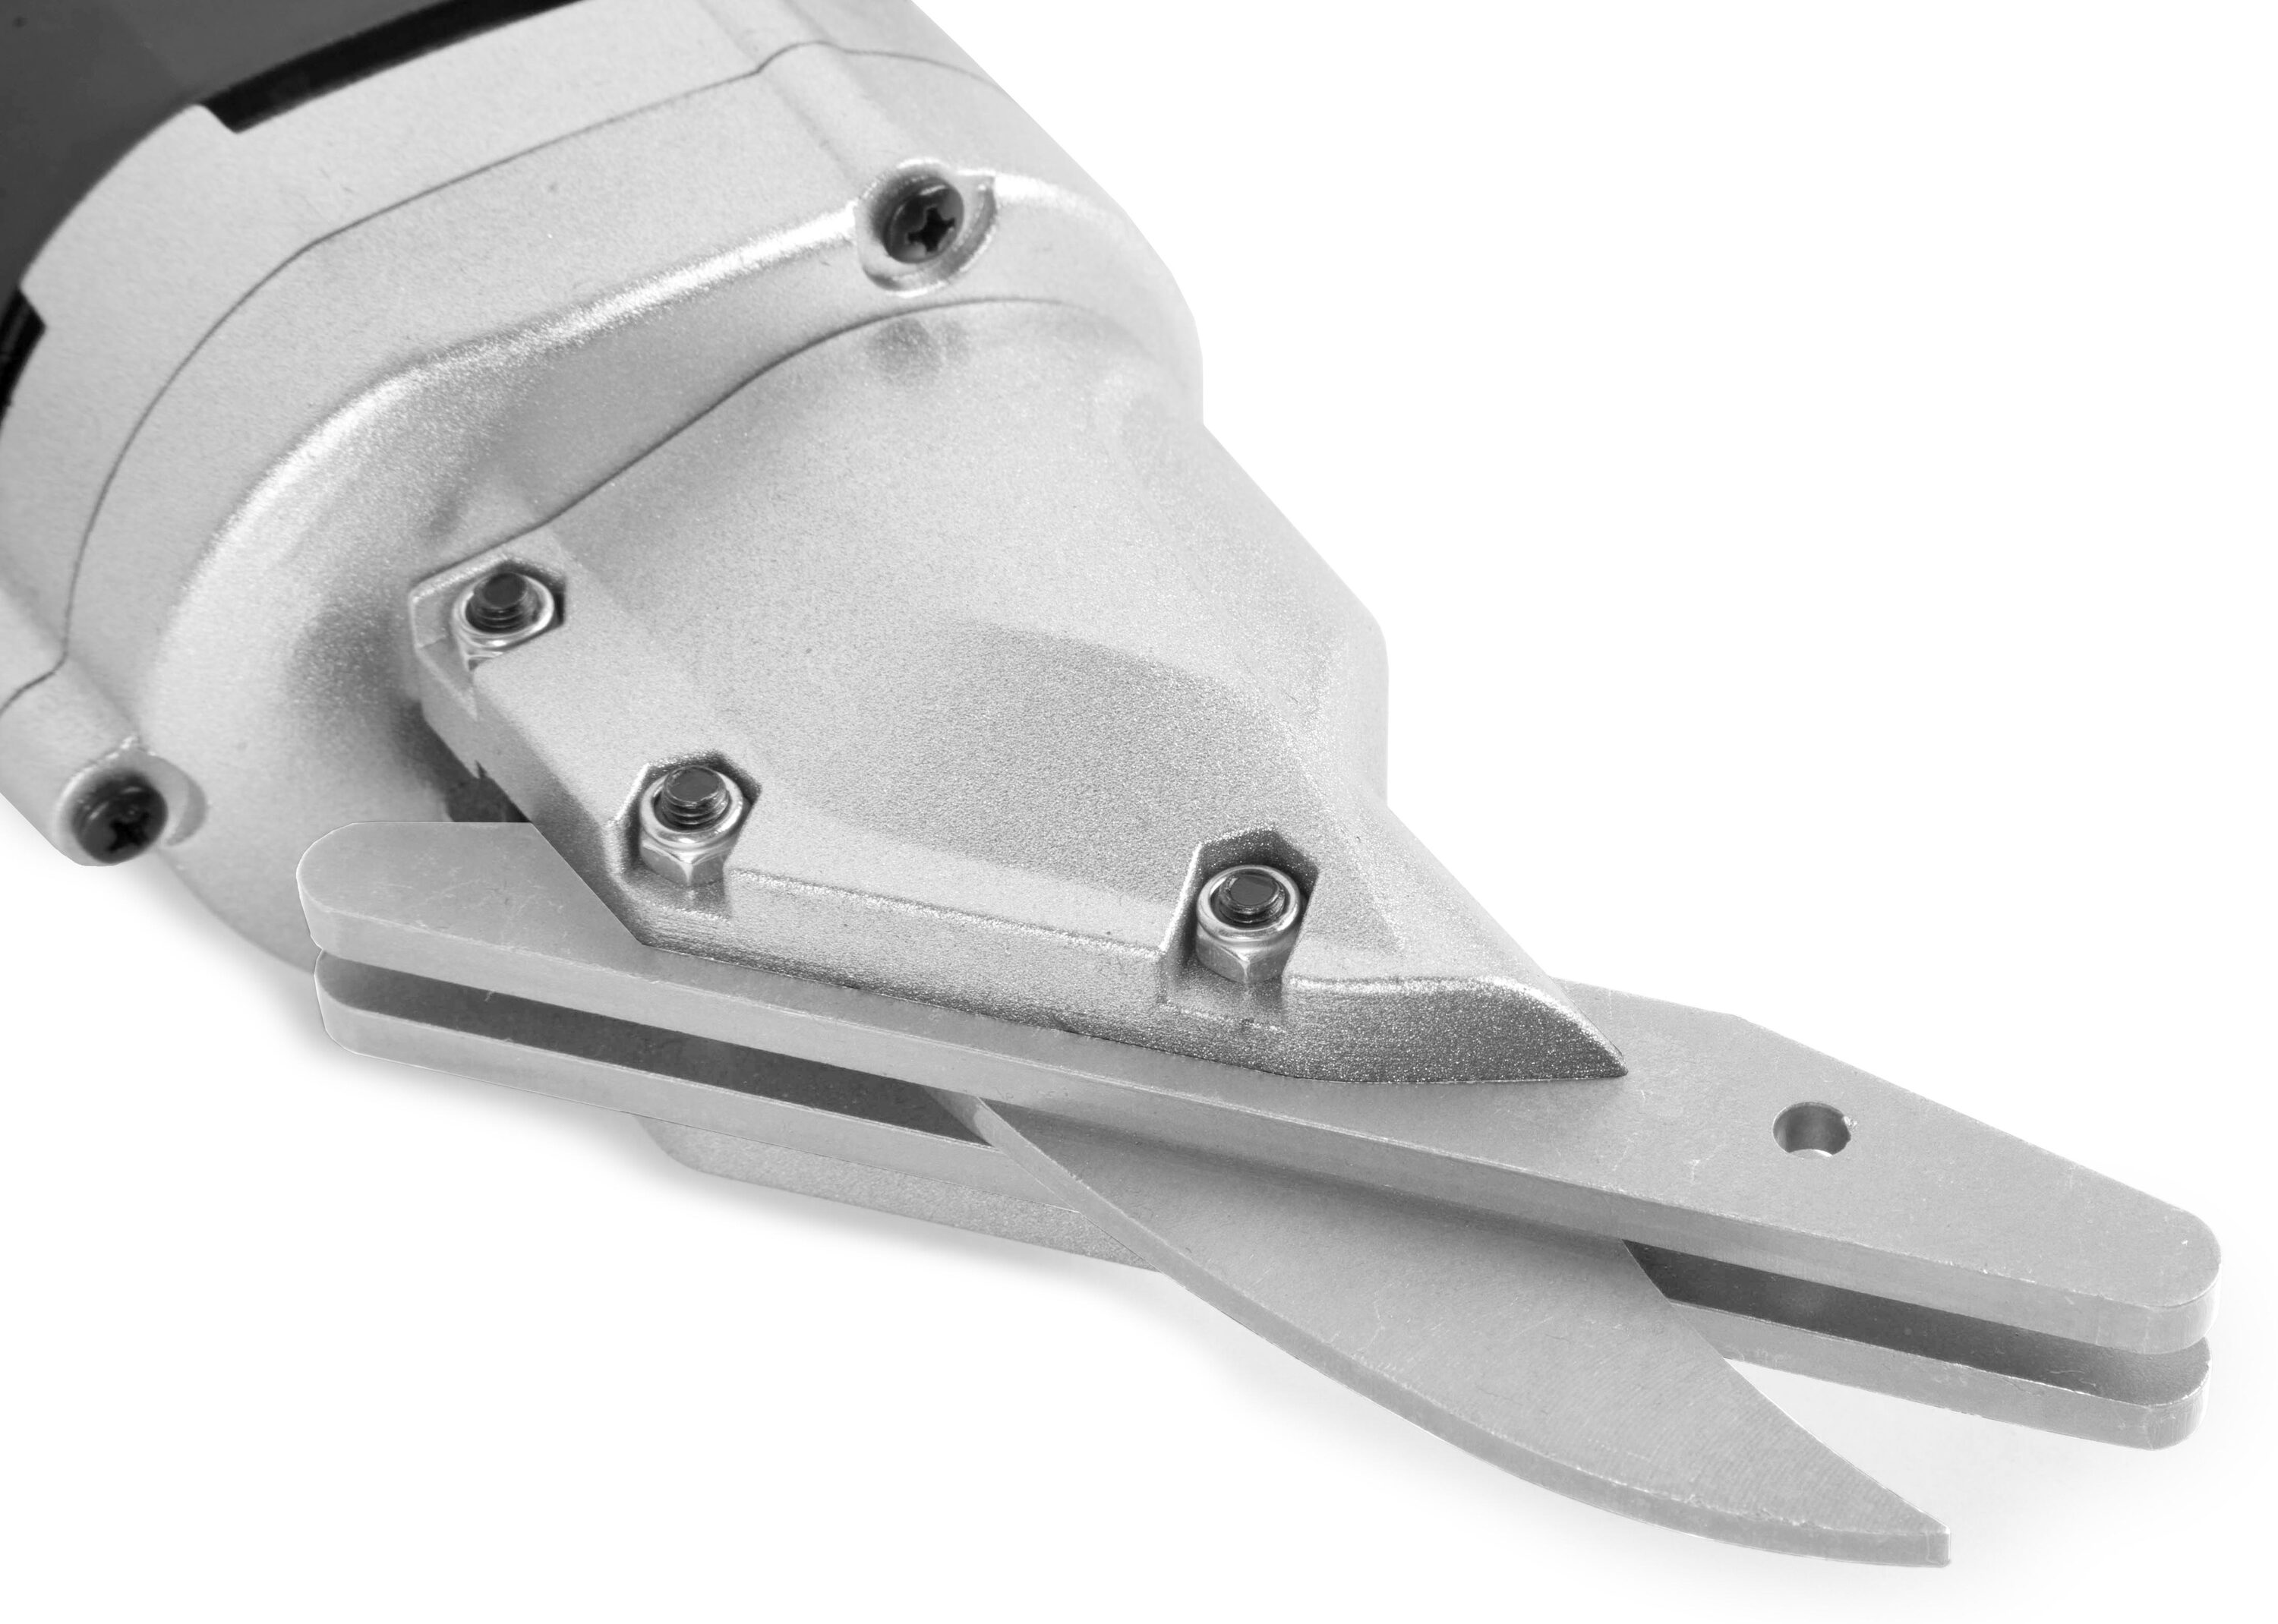 CRAFTSMAN Miter Steel Snips in the Tin Snips department at